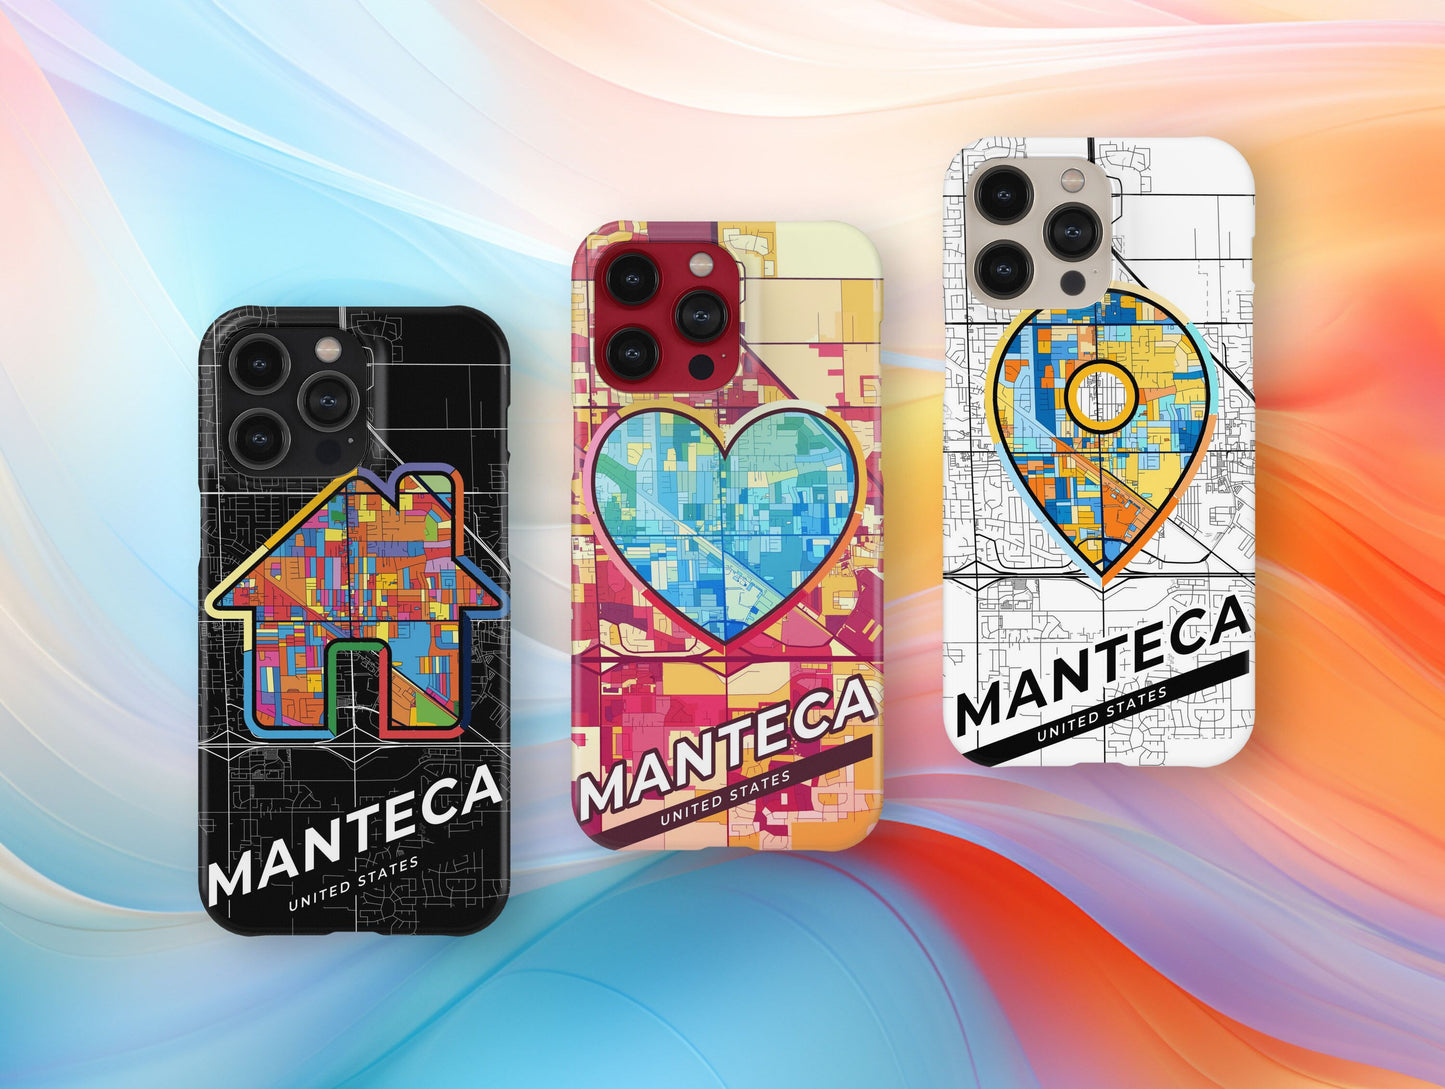 Manteca California slim phone case with colorful icon. Birthday, wedding or housewarming gift. Couple match cases.